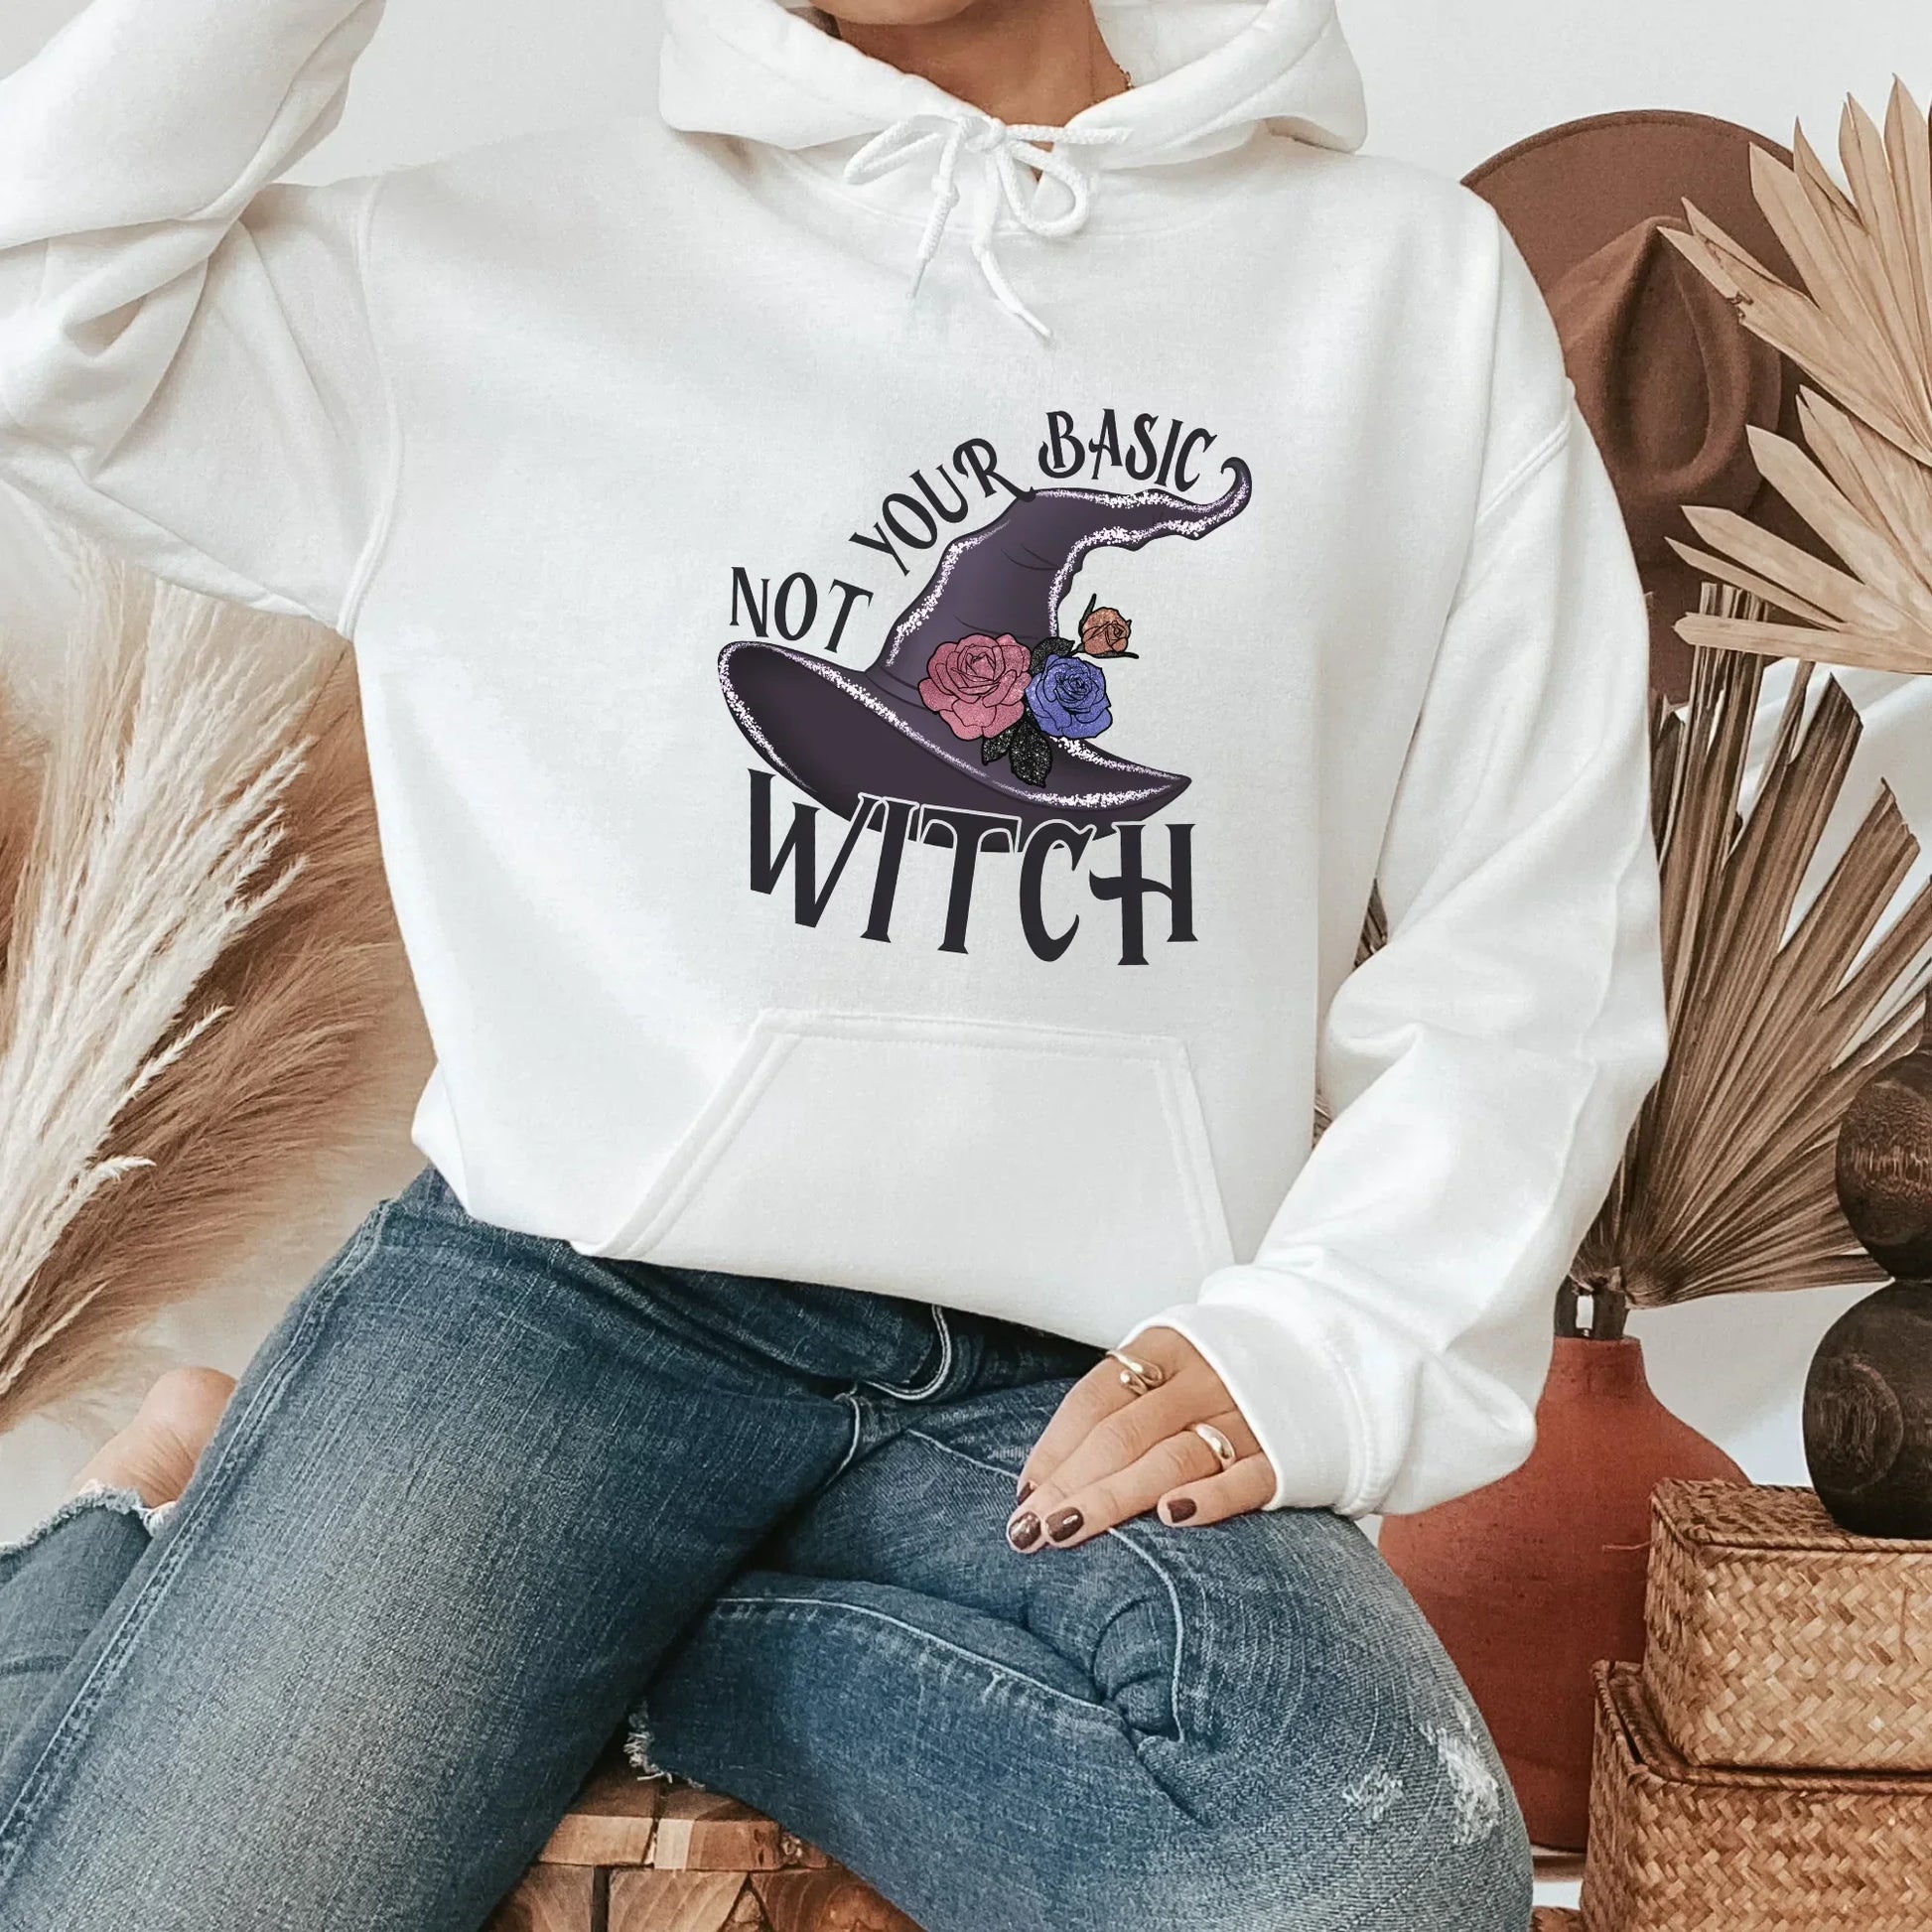 Not your Basic Witch, Gothic Shirt, Witchy Vibes Tee